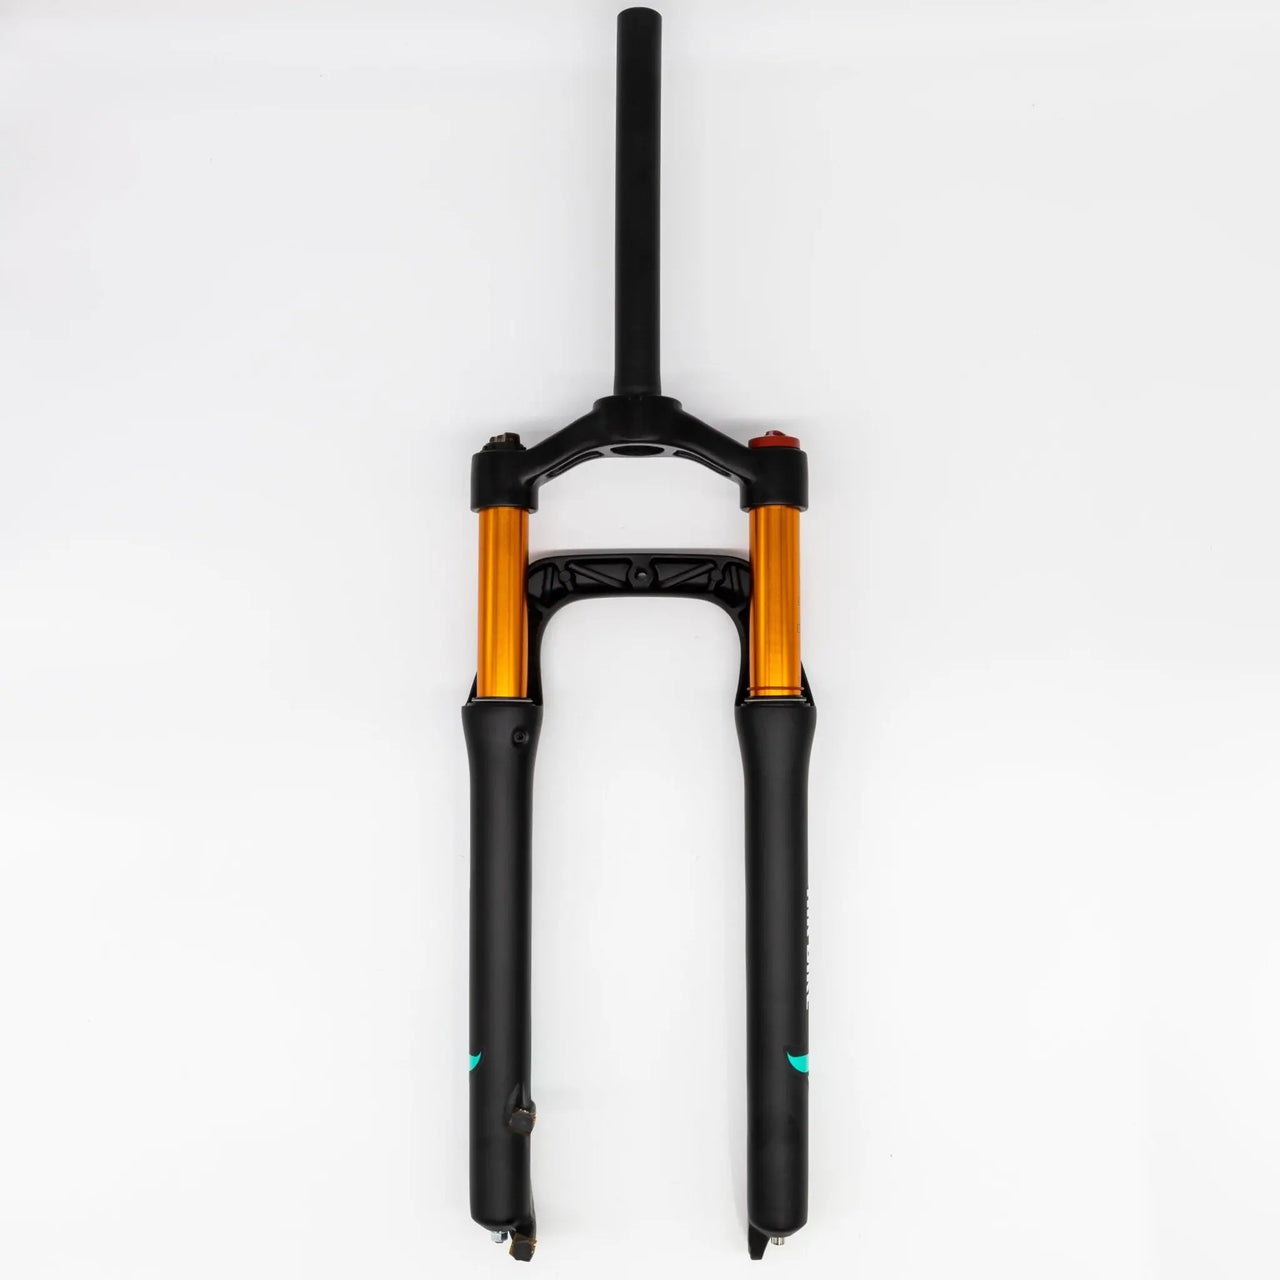 26 Inch Fat Tyre Suspension Fork 120mm Travel + Lockout Black - Air Bike - Air BikeSuspension Fork